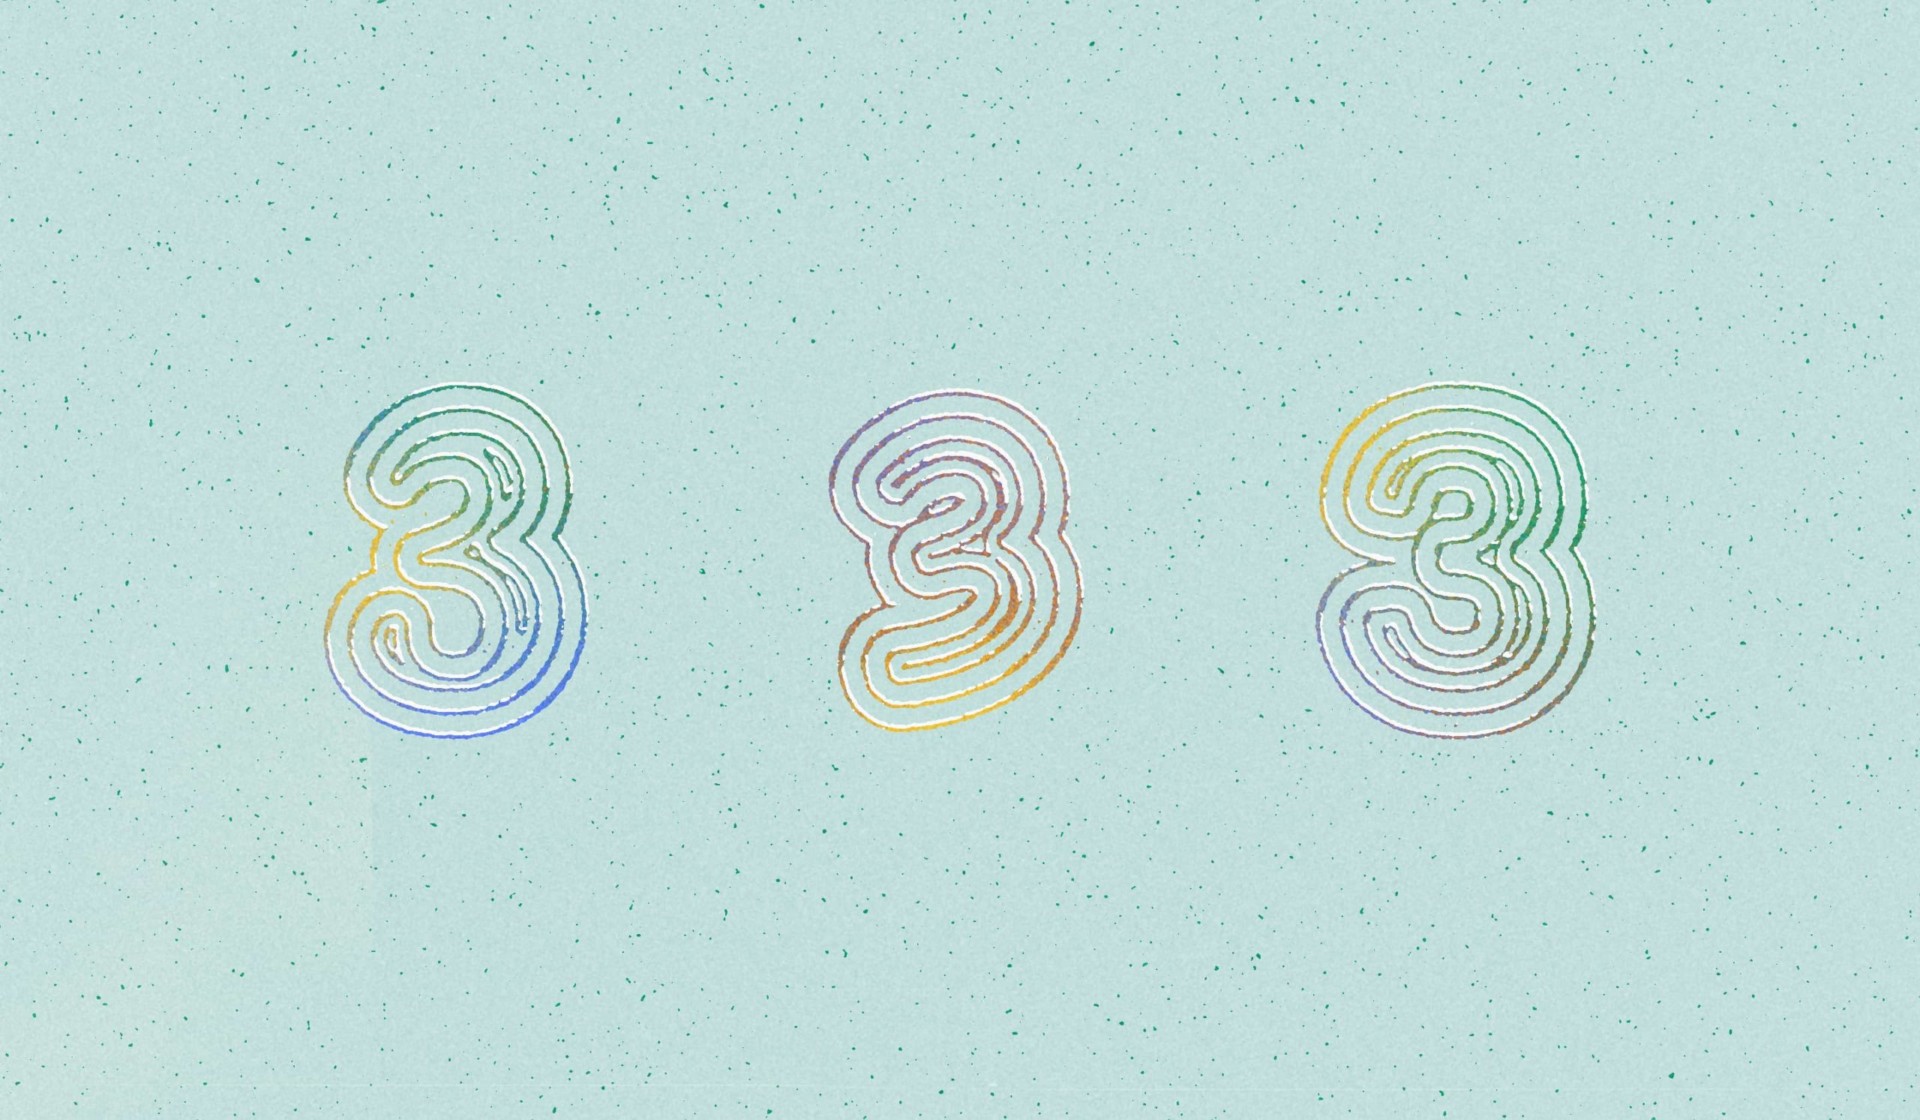 series of three number 3s